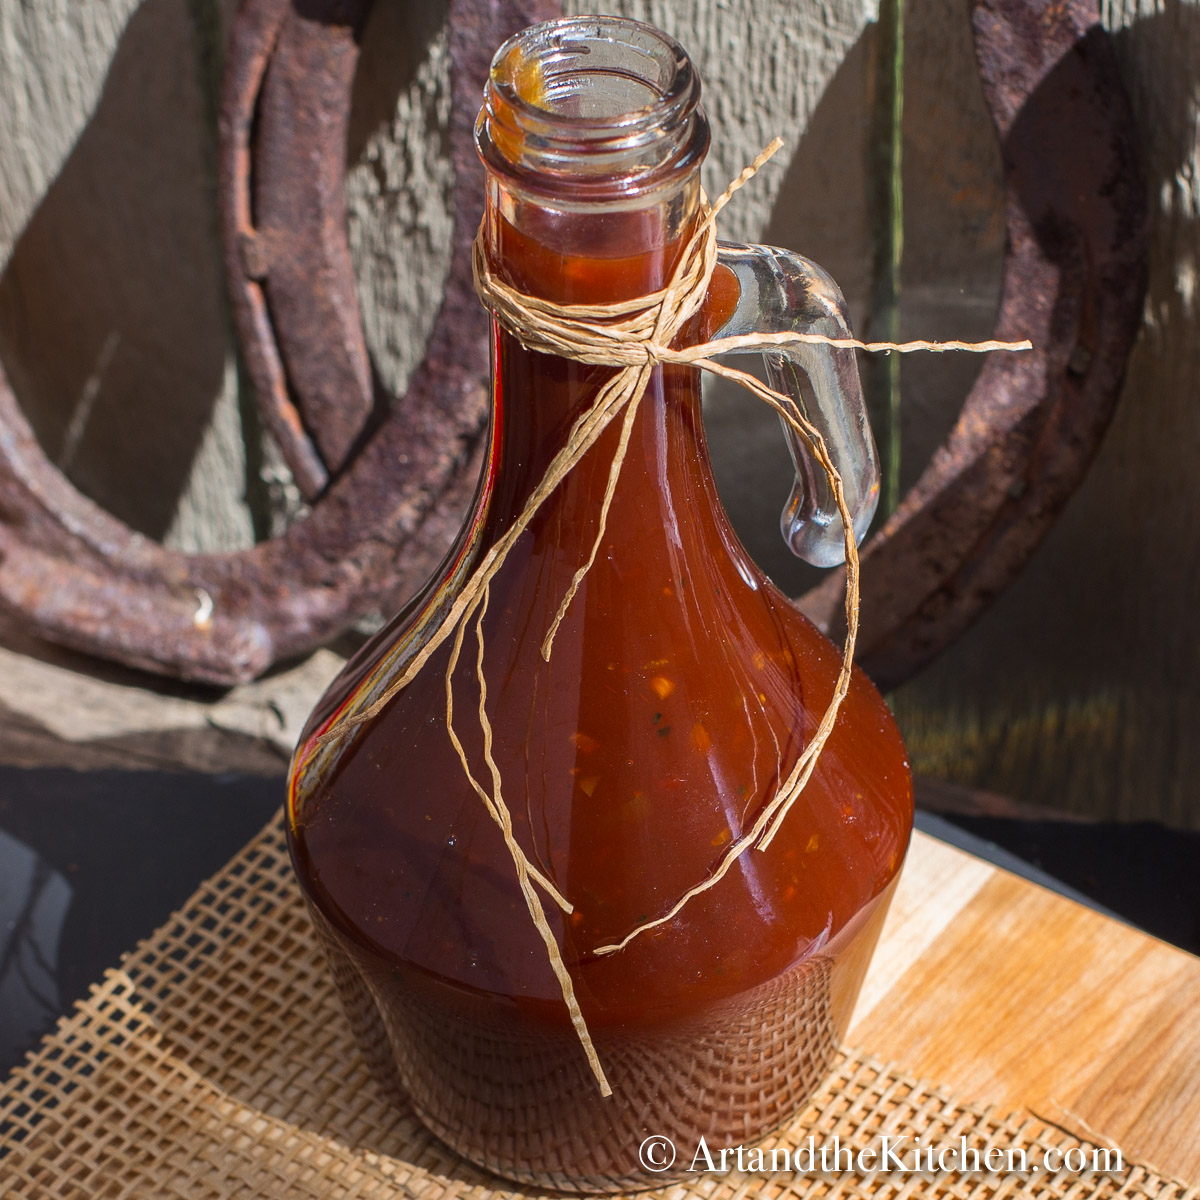 Decorative glass jar filled with homemade BBQ sauce.